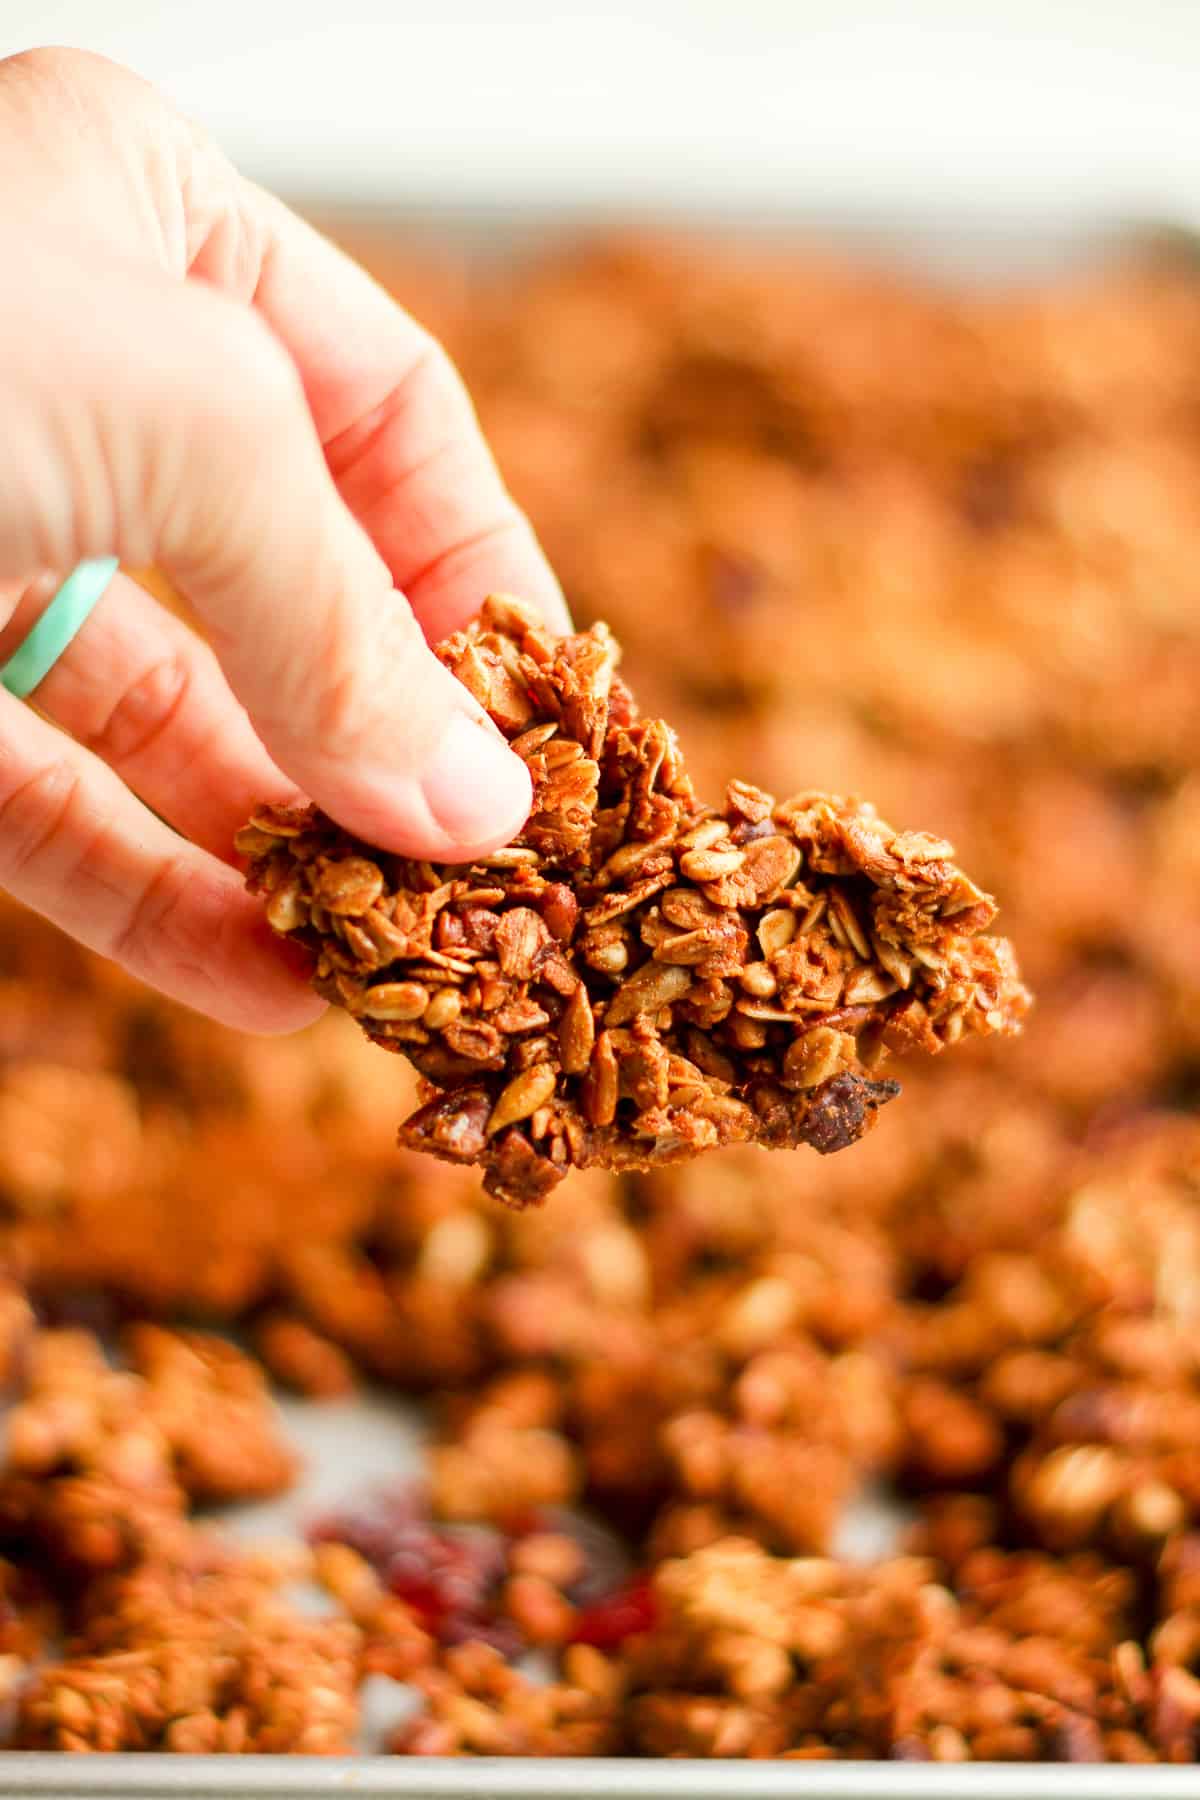 My hand holding a large piece of maple pecan granola.